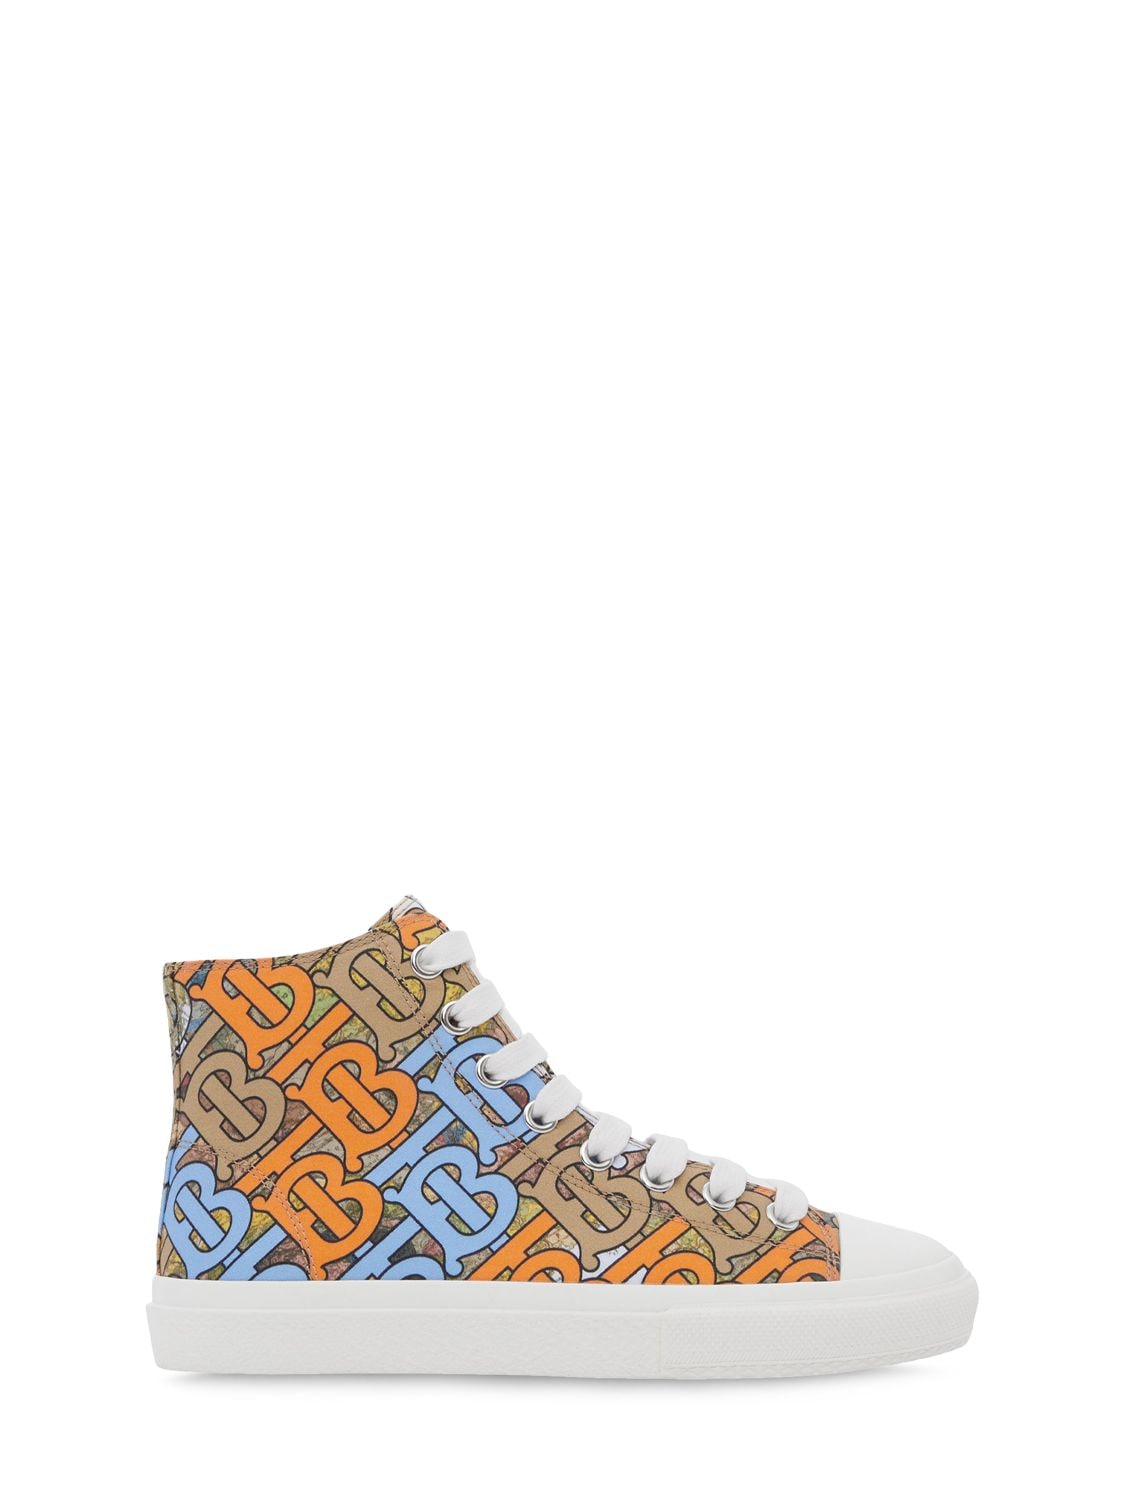 Printed Canvas Lace-up High Top Sneakers